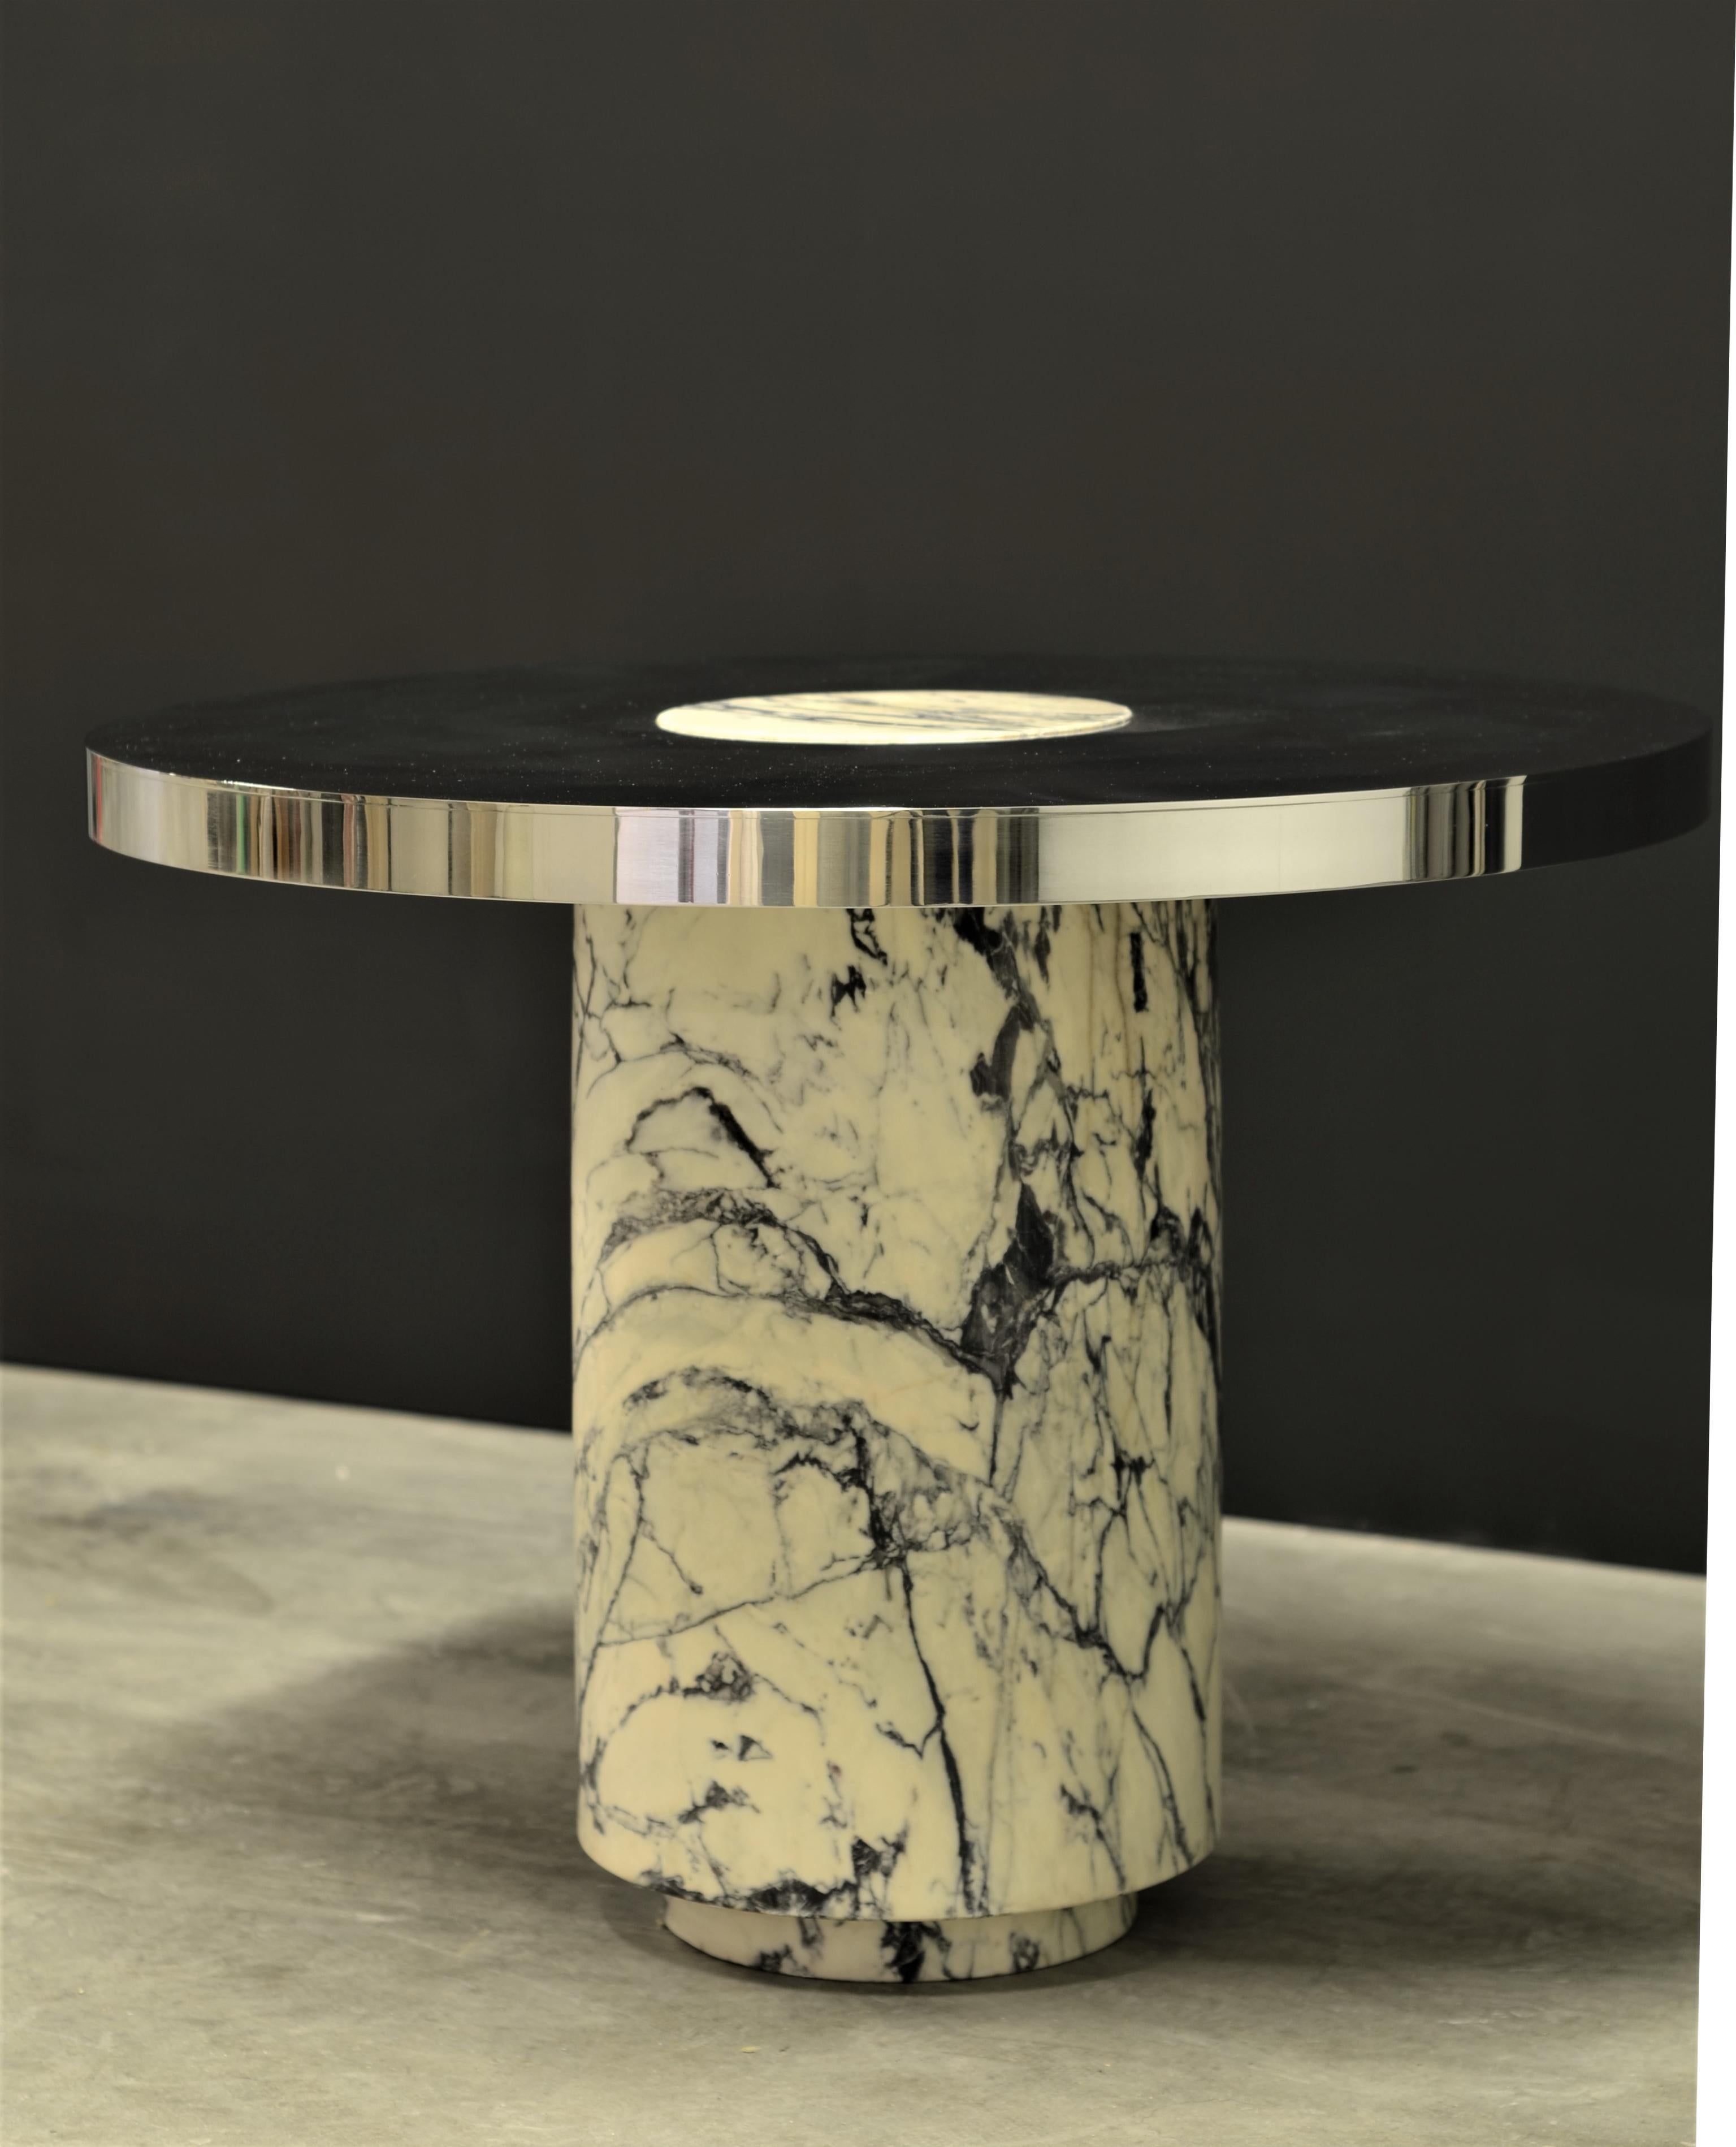 Impressive and smart circular table with a mirror finished stainless steel top and solid Paonazzetto marble base.

The top and bottom of the base have been narrowed, the narrowed top sticks thru and sits flush with the mirrored stainless steel